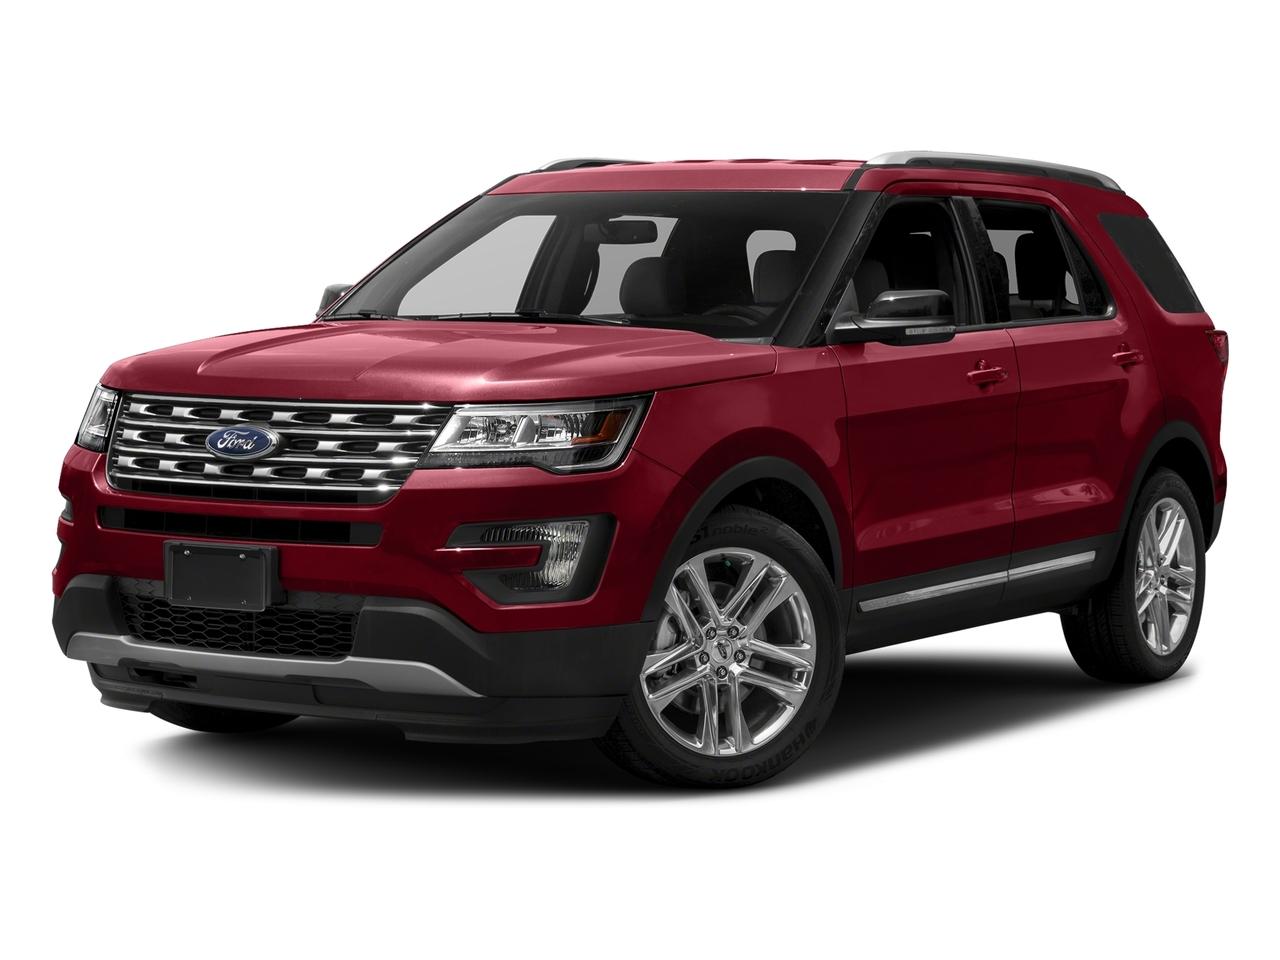 2017 Ford Explorer Vehicle Photo in Pilot Point, TX 76258-6053